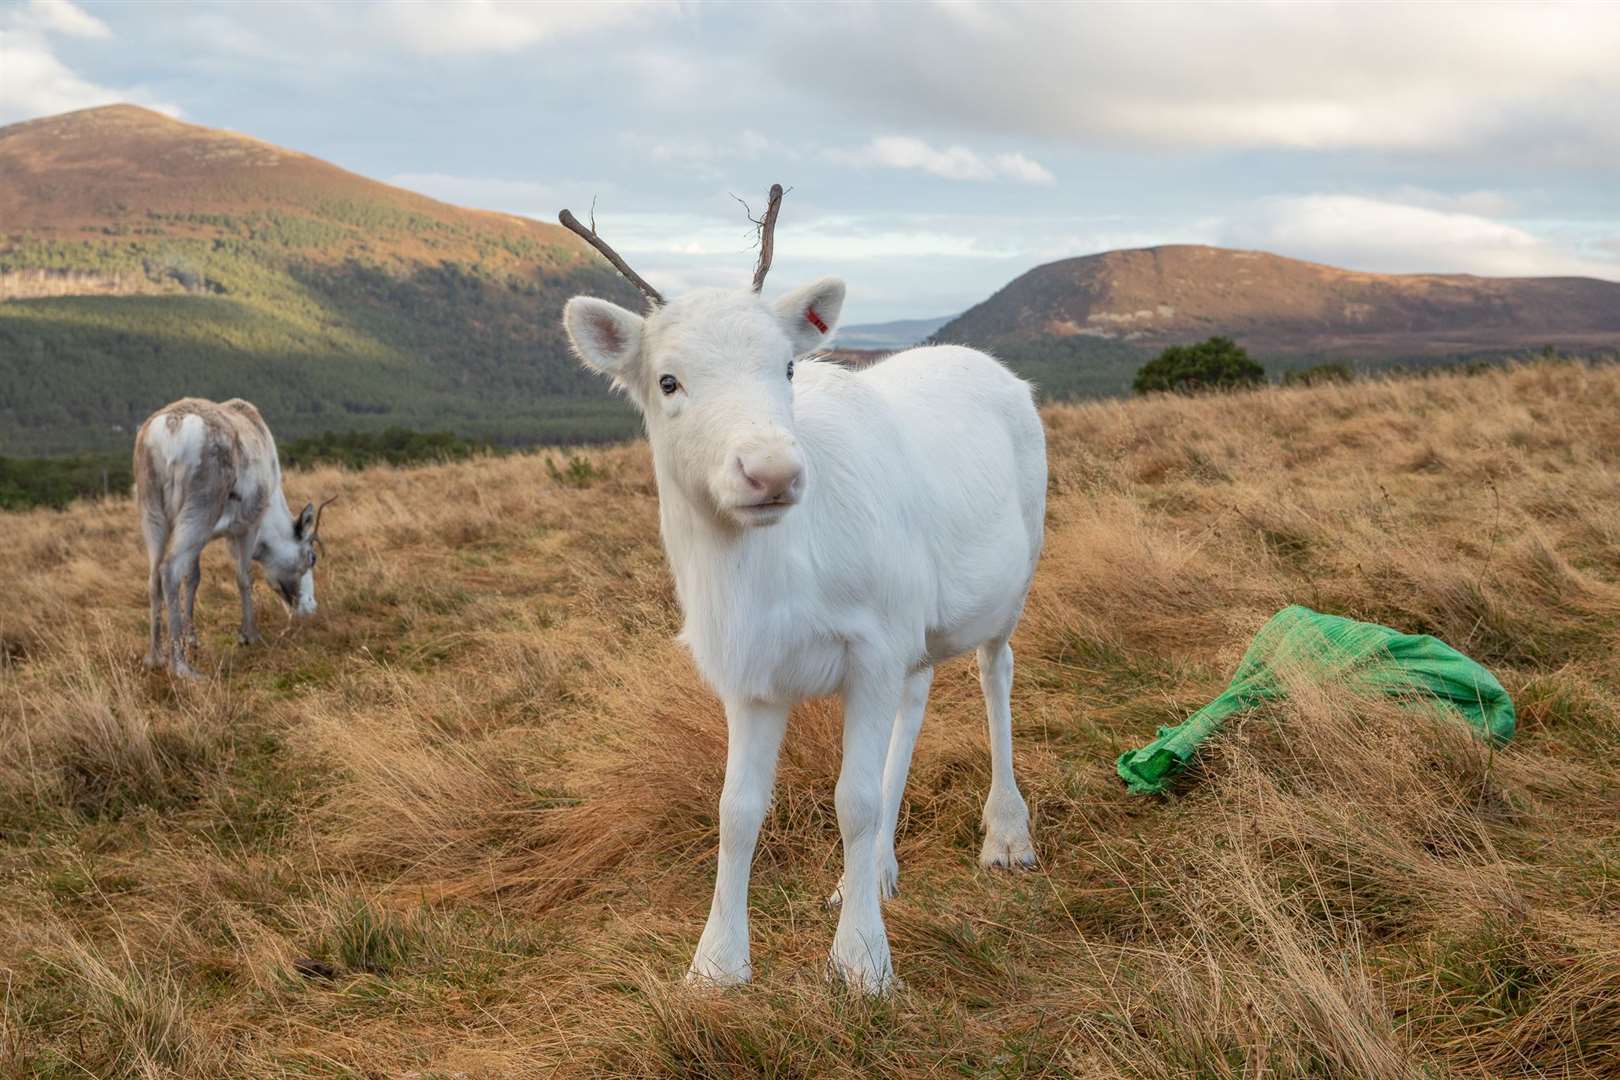 Three rare white reindeer calves are preparing to tour the UK to spread festive cheer in the run-up to Christmas.